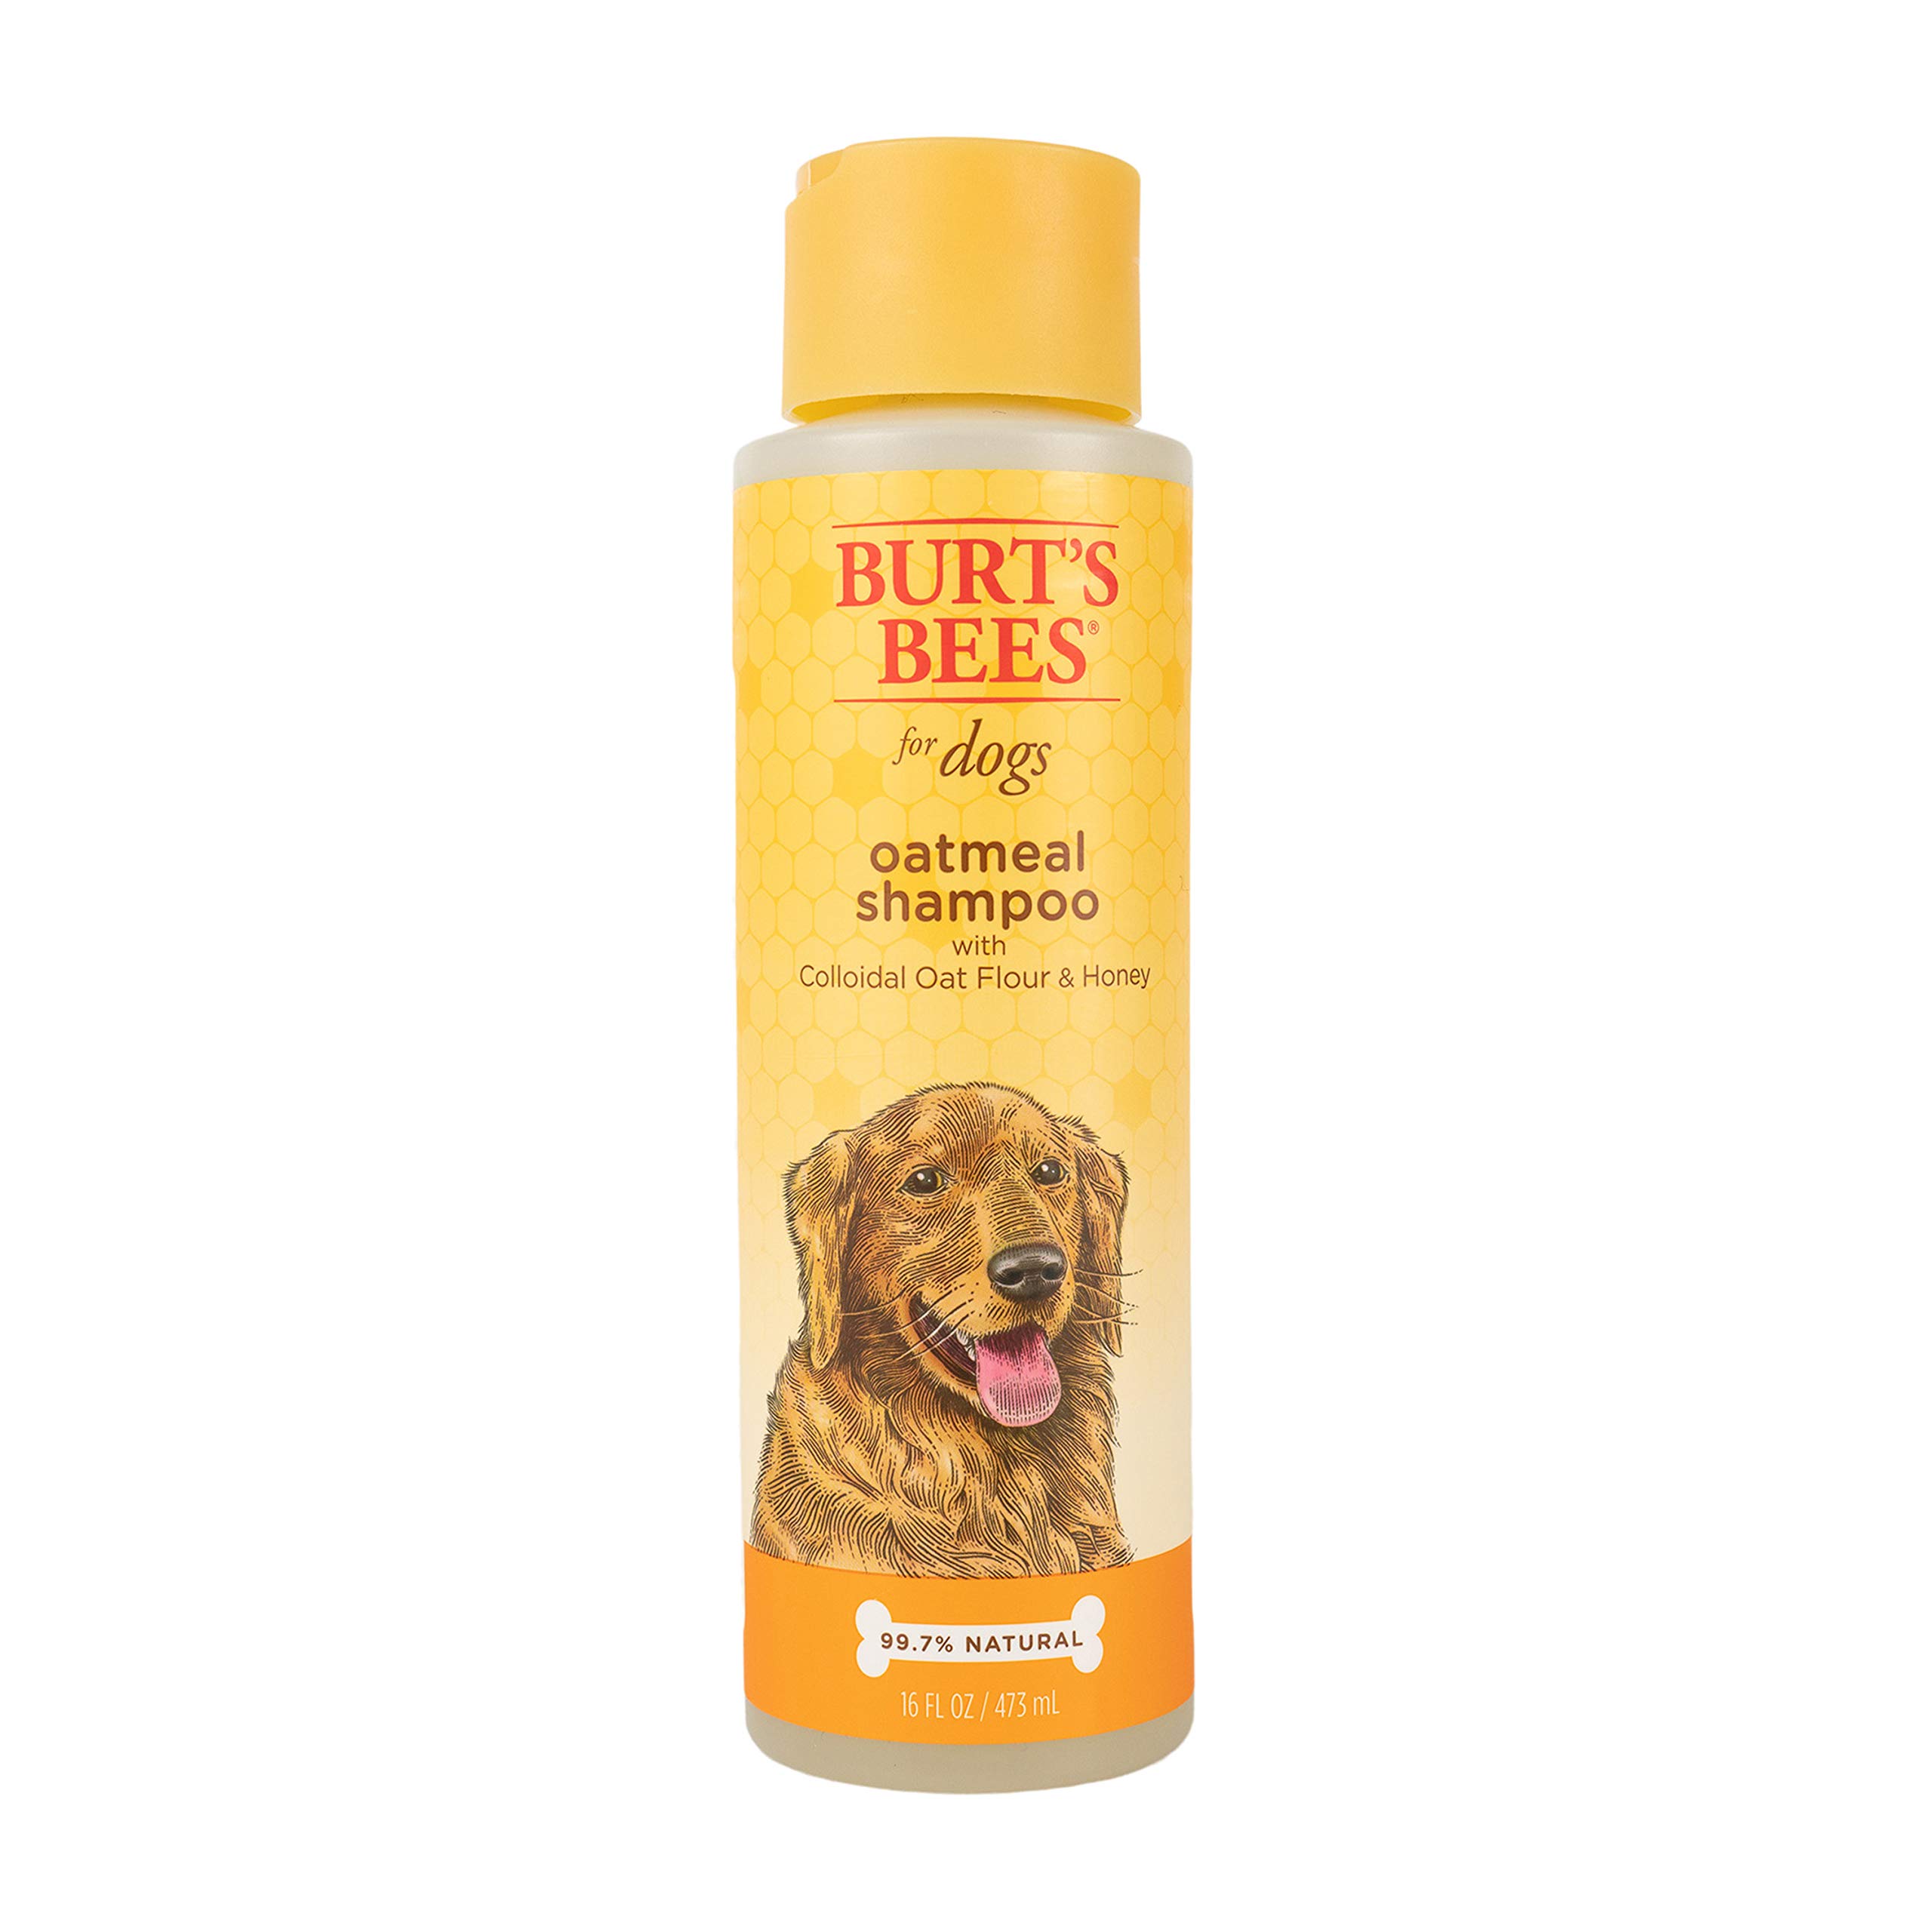 16-Oz Burt's Bees for Dogs Oatmeal Shampoo $4.90 w/ S&S + Free Shipping w/ Prime or on $25+